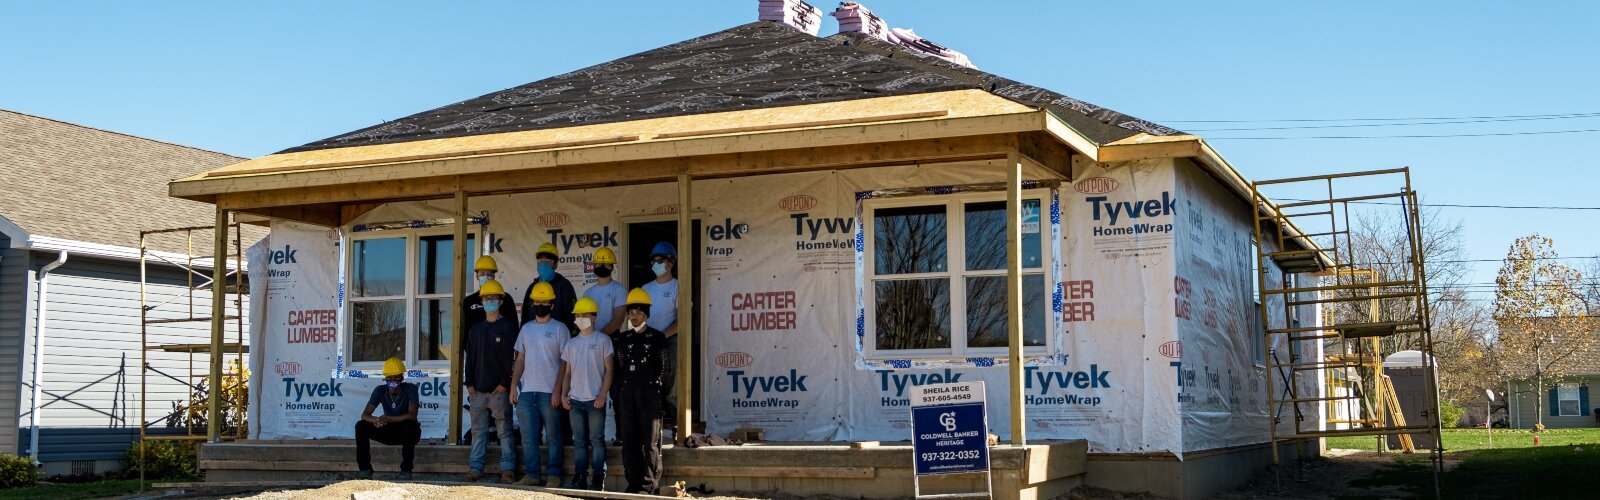 Students from Springfield-Clark CTC get hands-on experience building houses through a collaboration with Neighborhood Housing Partnership of Greater Springfield.